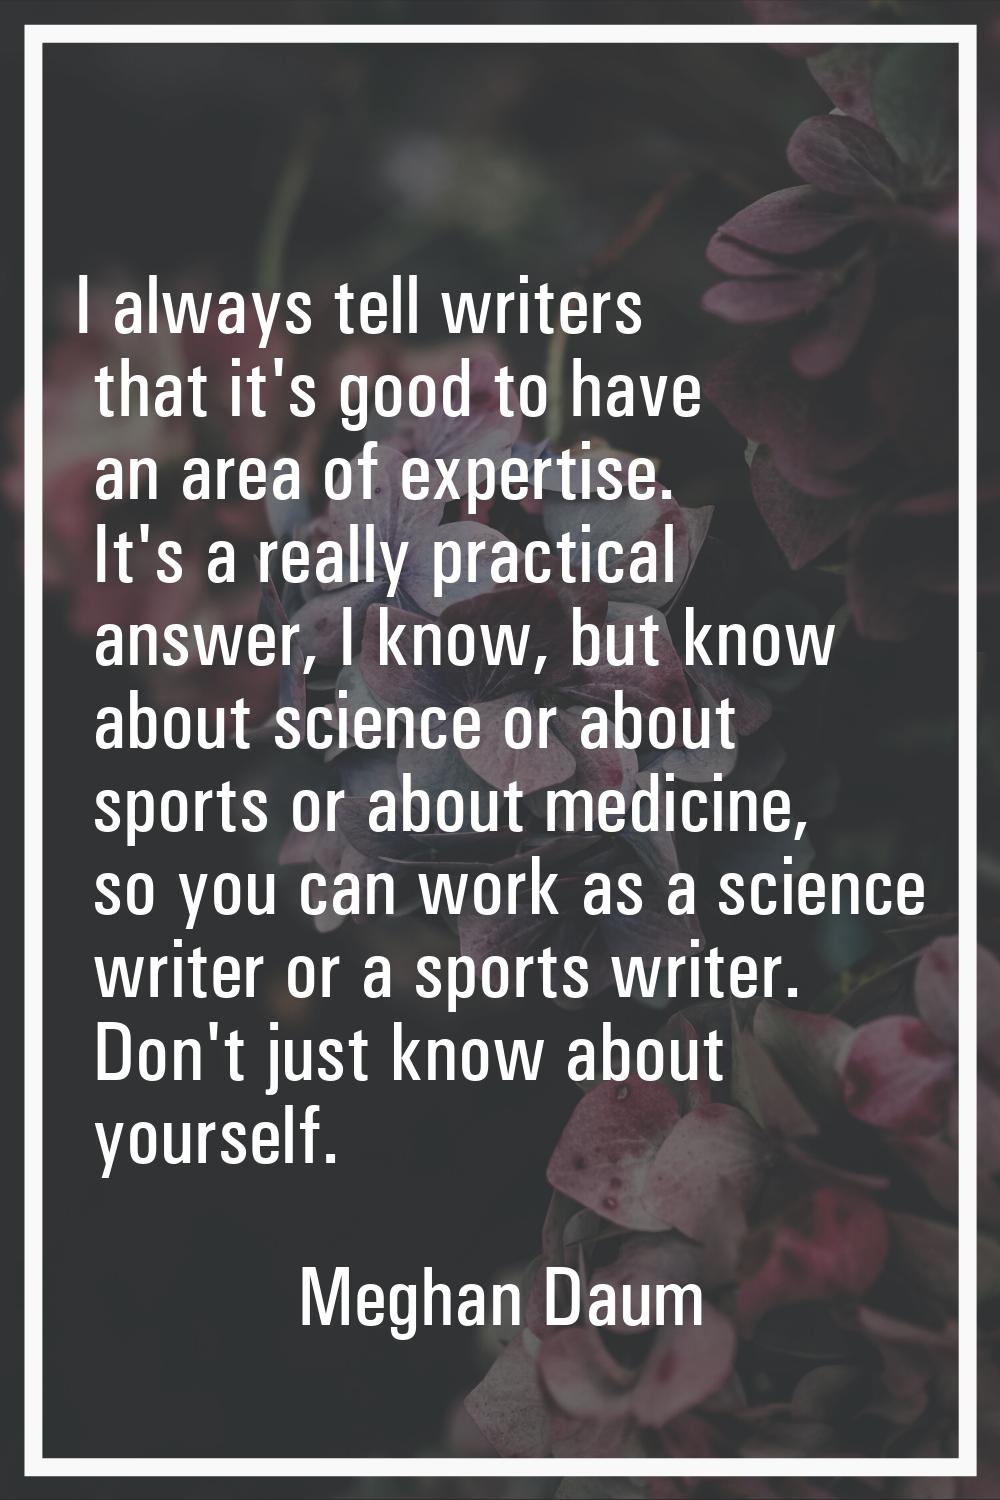 I always tell writers that it's good to have an area of expertise. It's a really practical answer, 